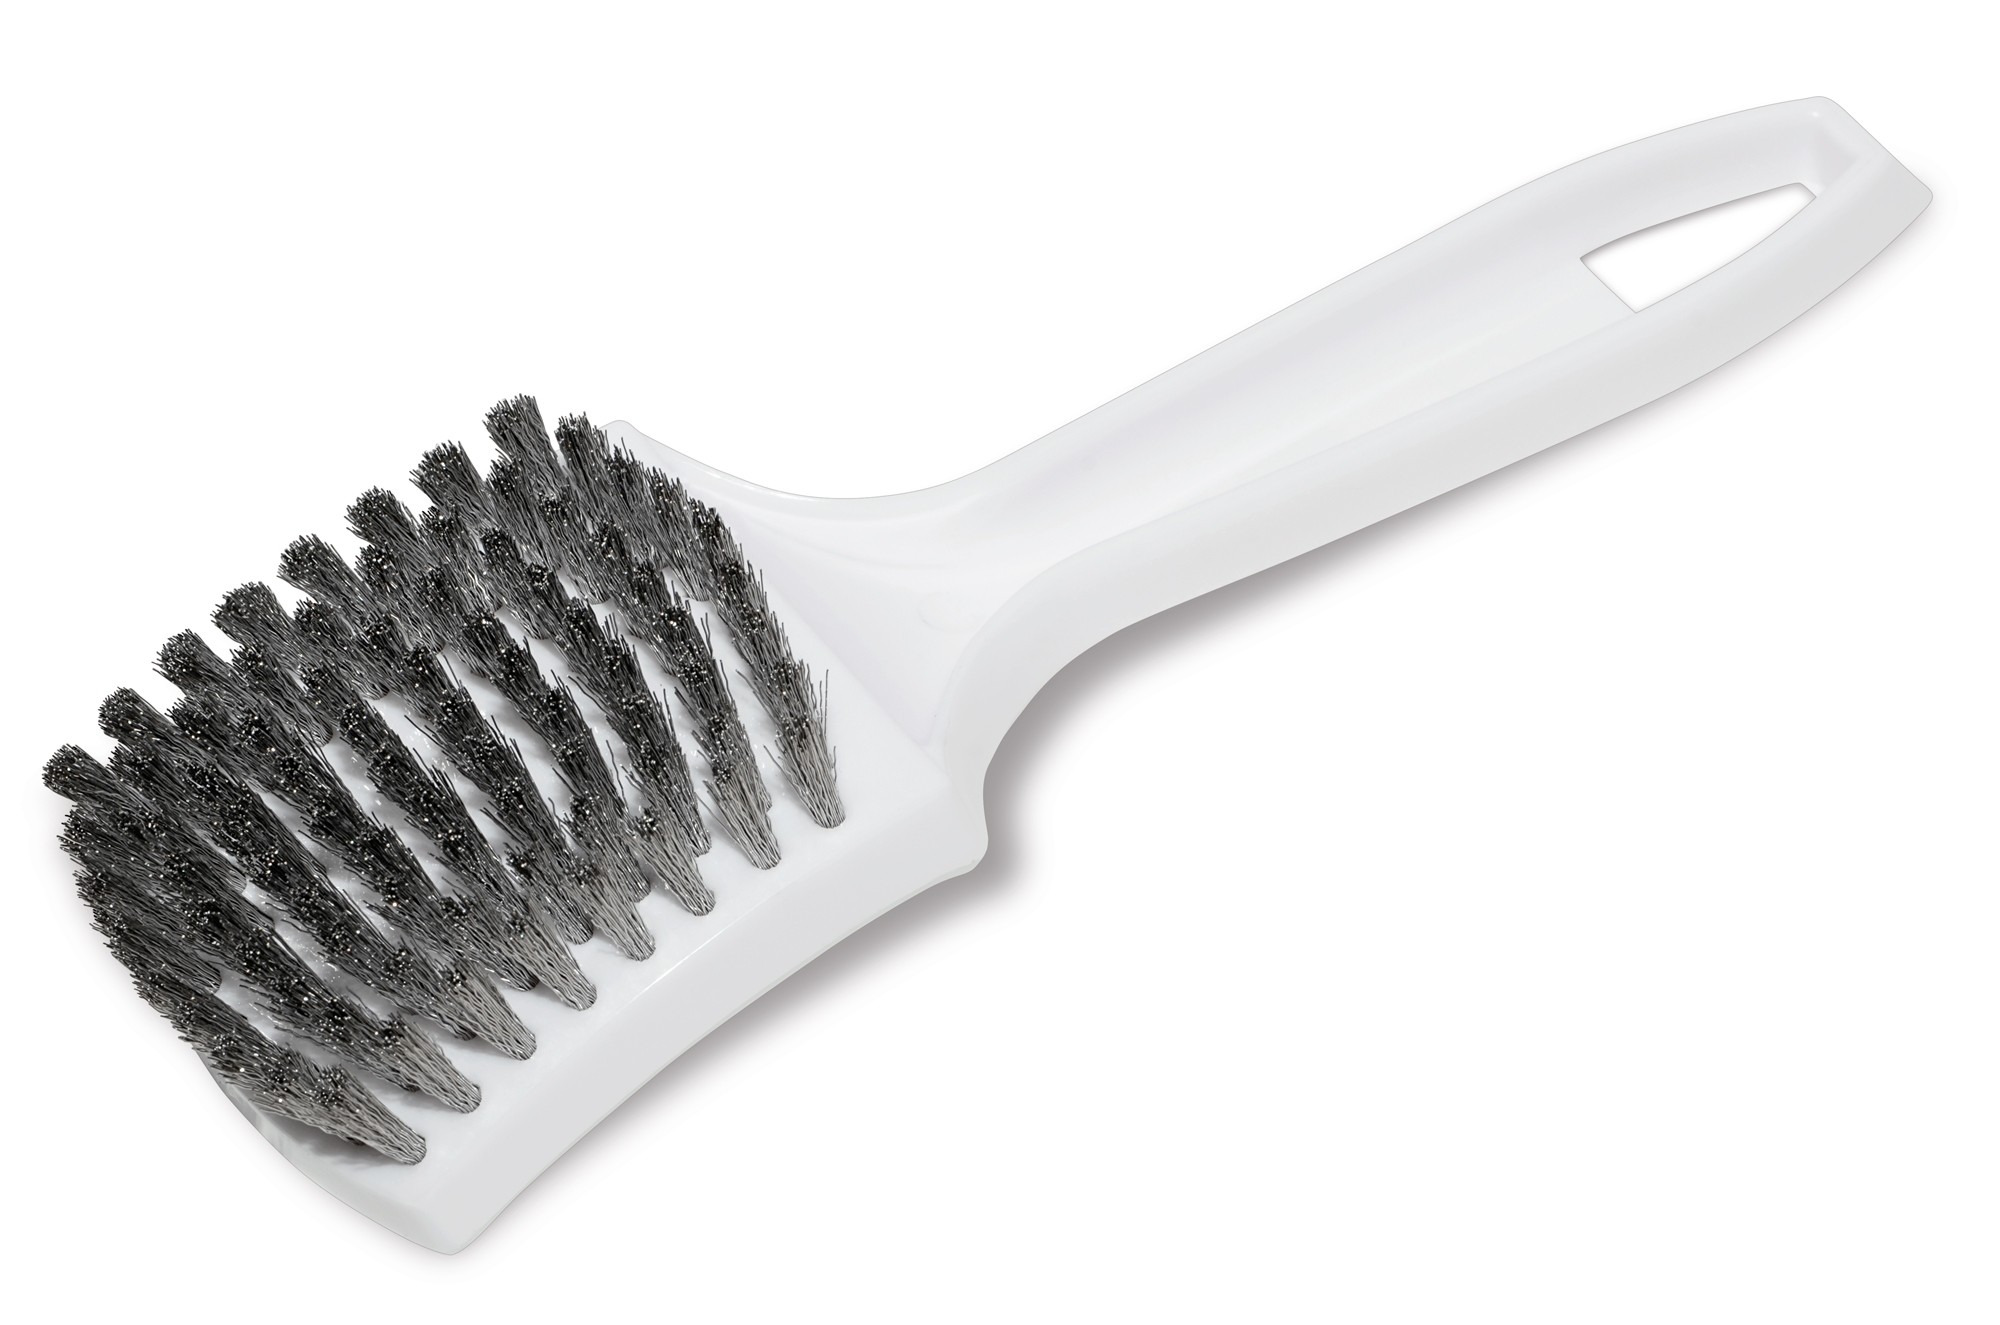 2 Pieces Wire Brush Steel Brush Large Stainless Steel Wire Scratch Brushes 14’’ Overall Length Brush with Wavy Grip Strong PP Plastic Handle 4 * 18 Row Bristles